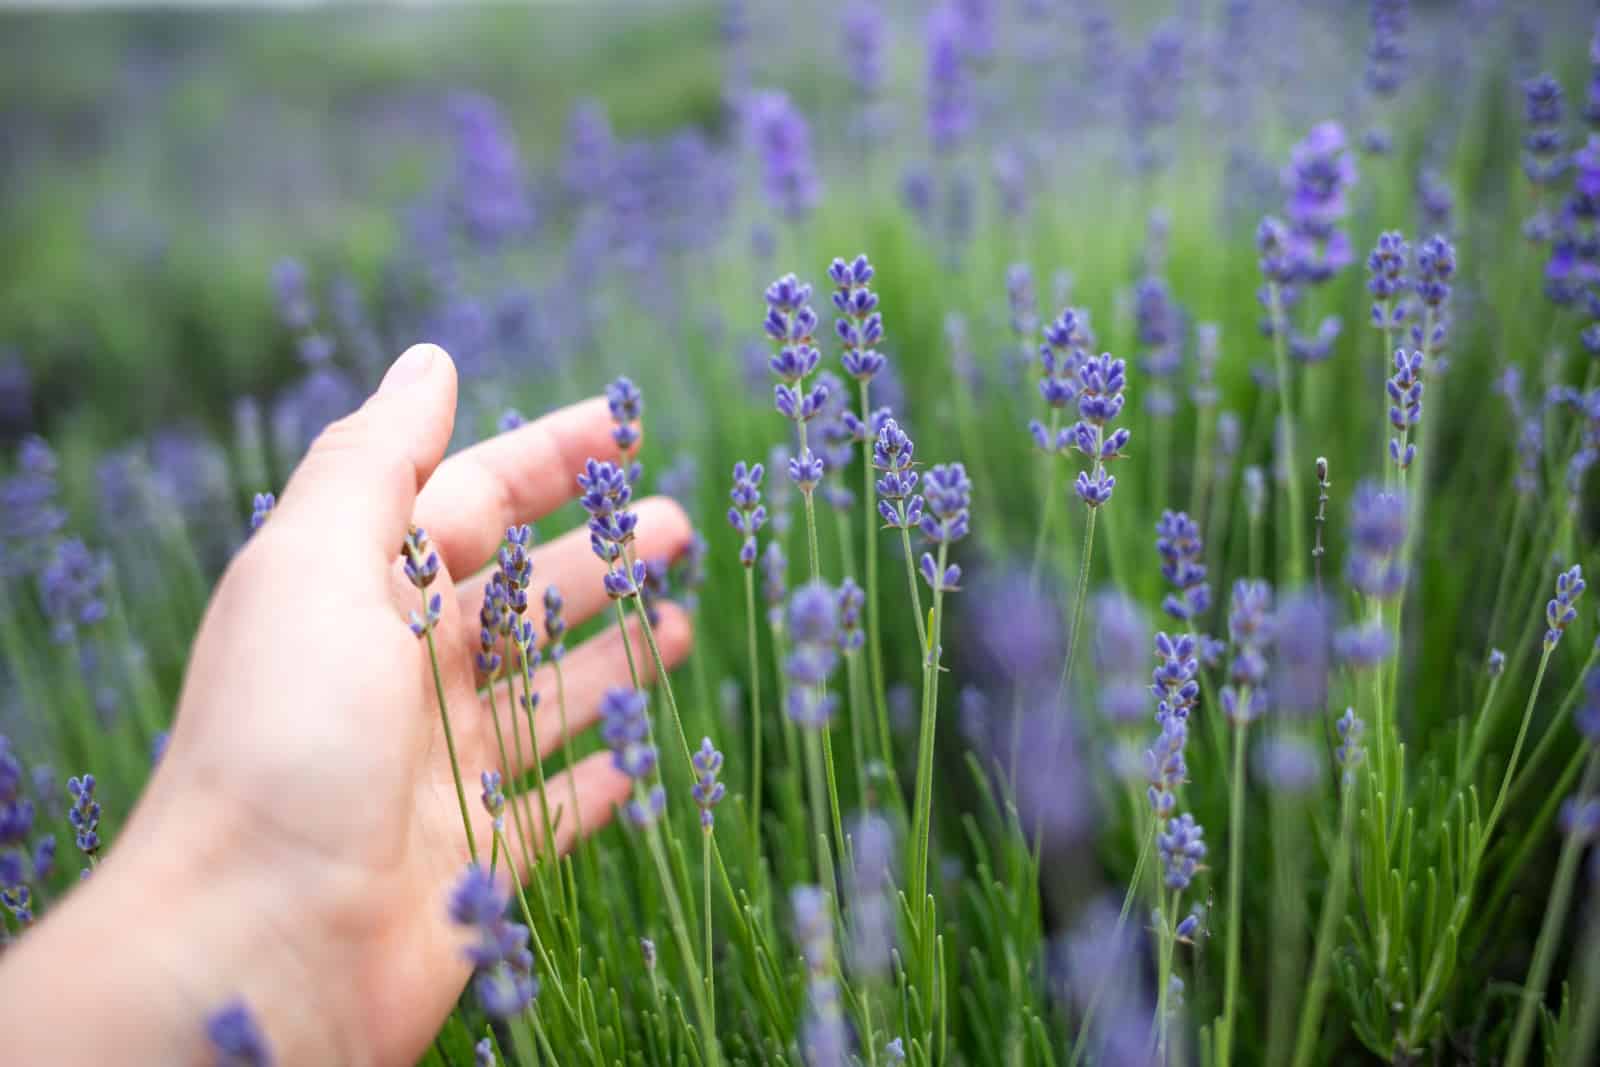 Lavender flowers in a lavender field are touched by a woman's hand